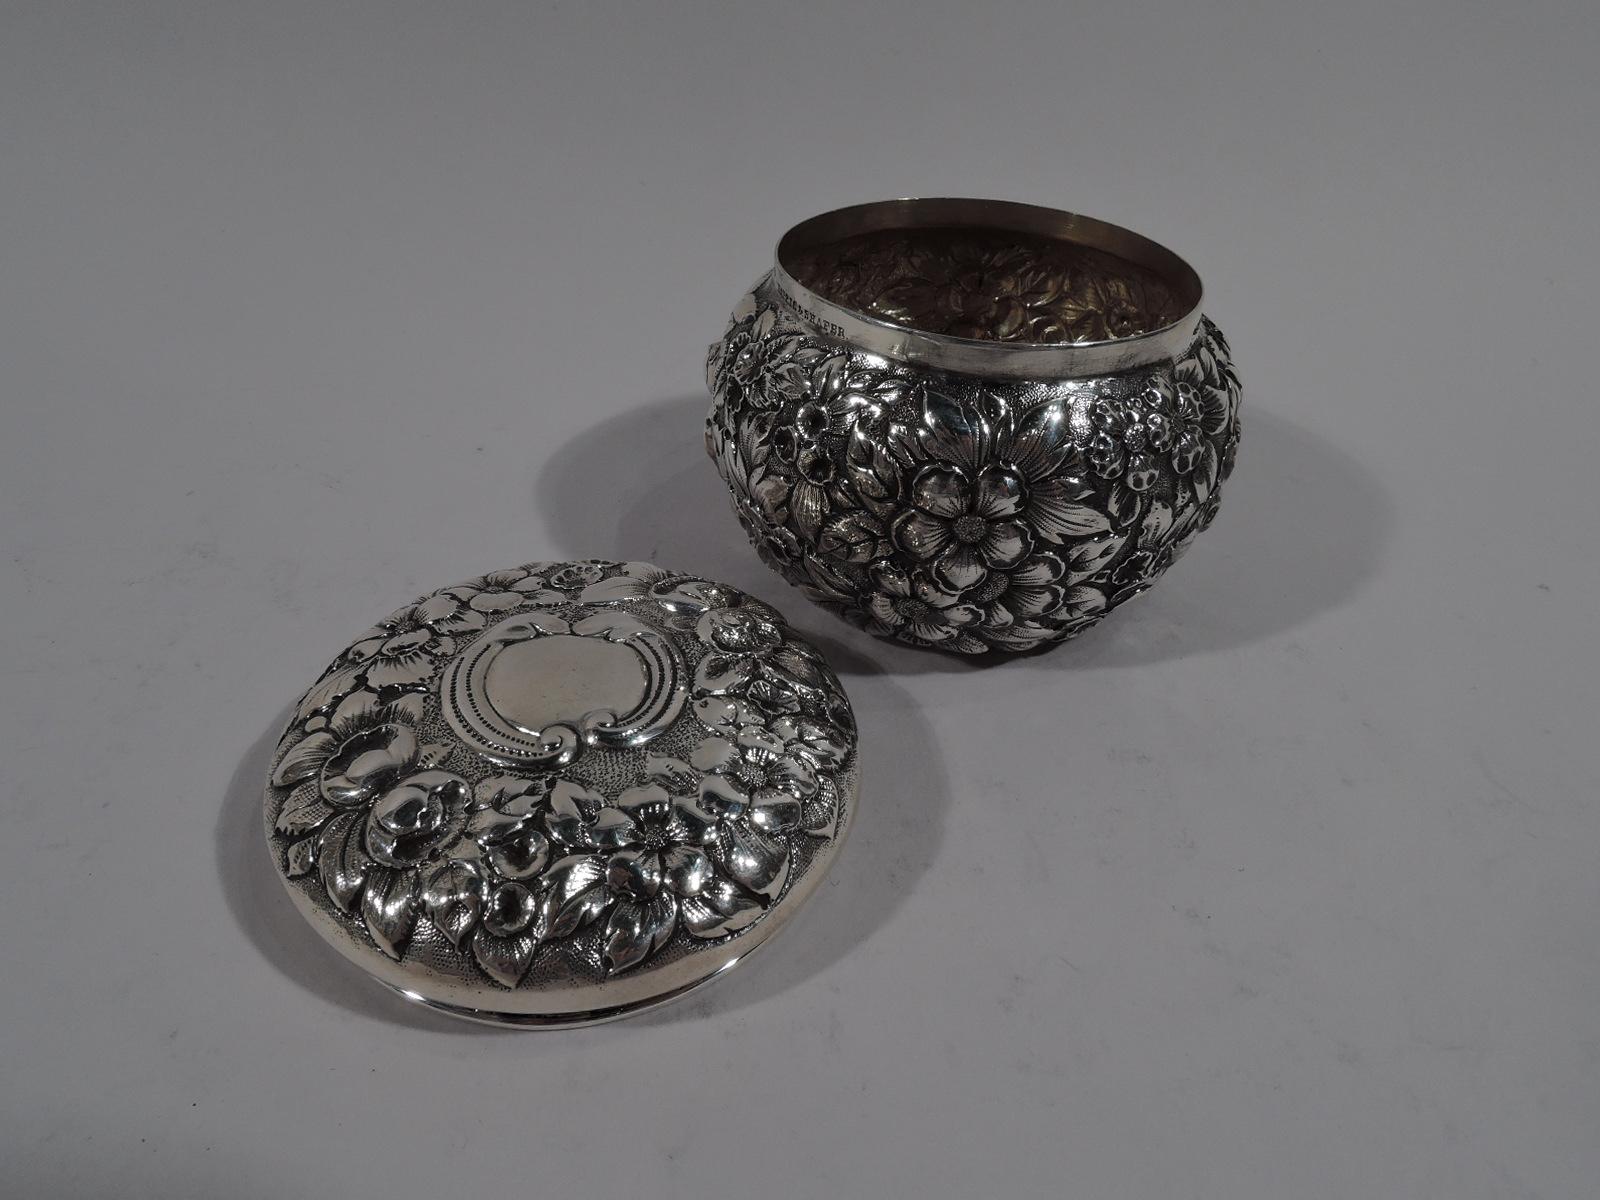 Victorian Antique Baltimore-Style Repousse Sterling Silver Trinket Box